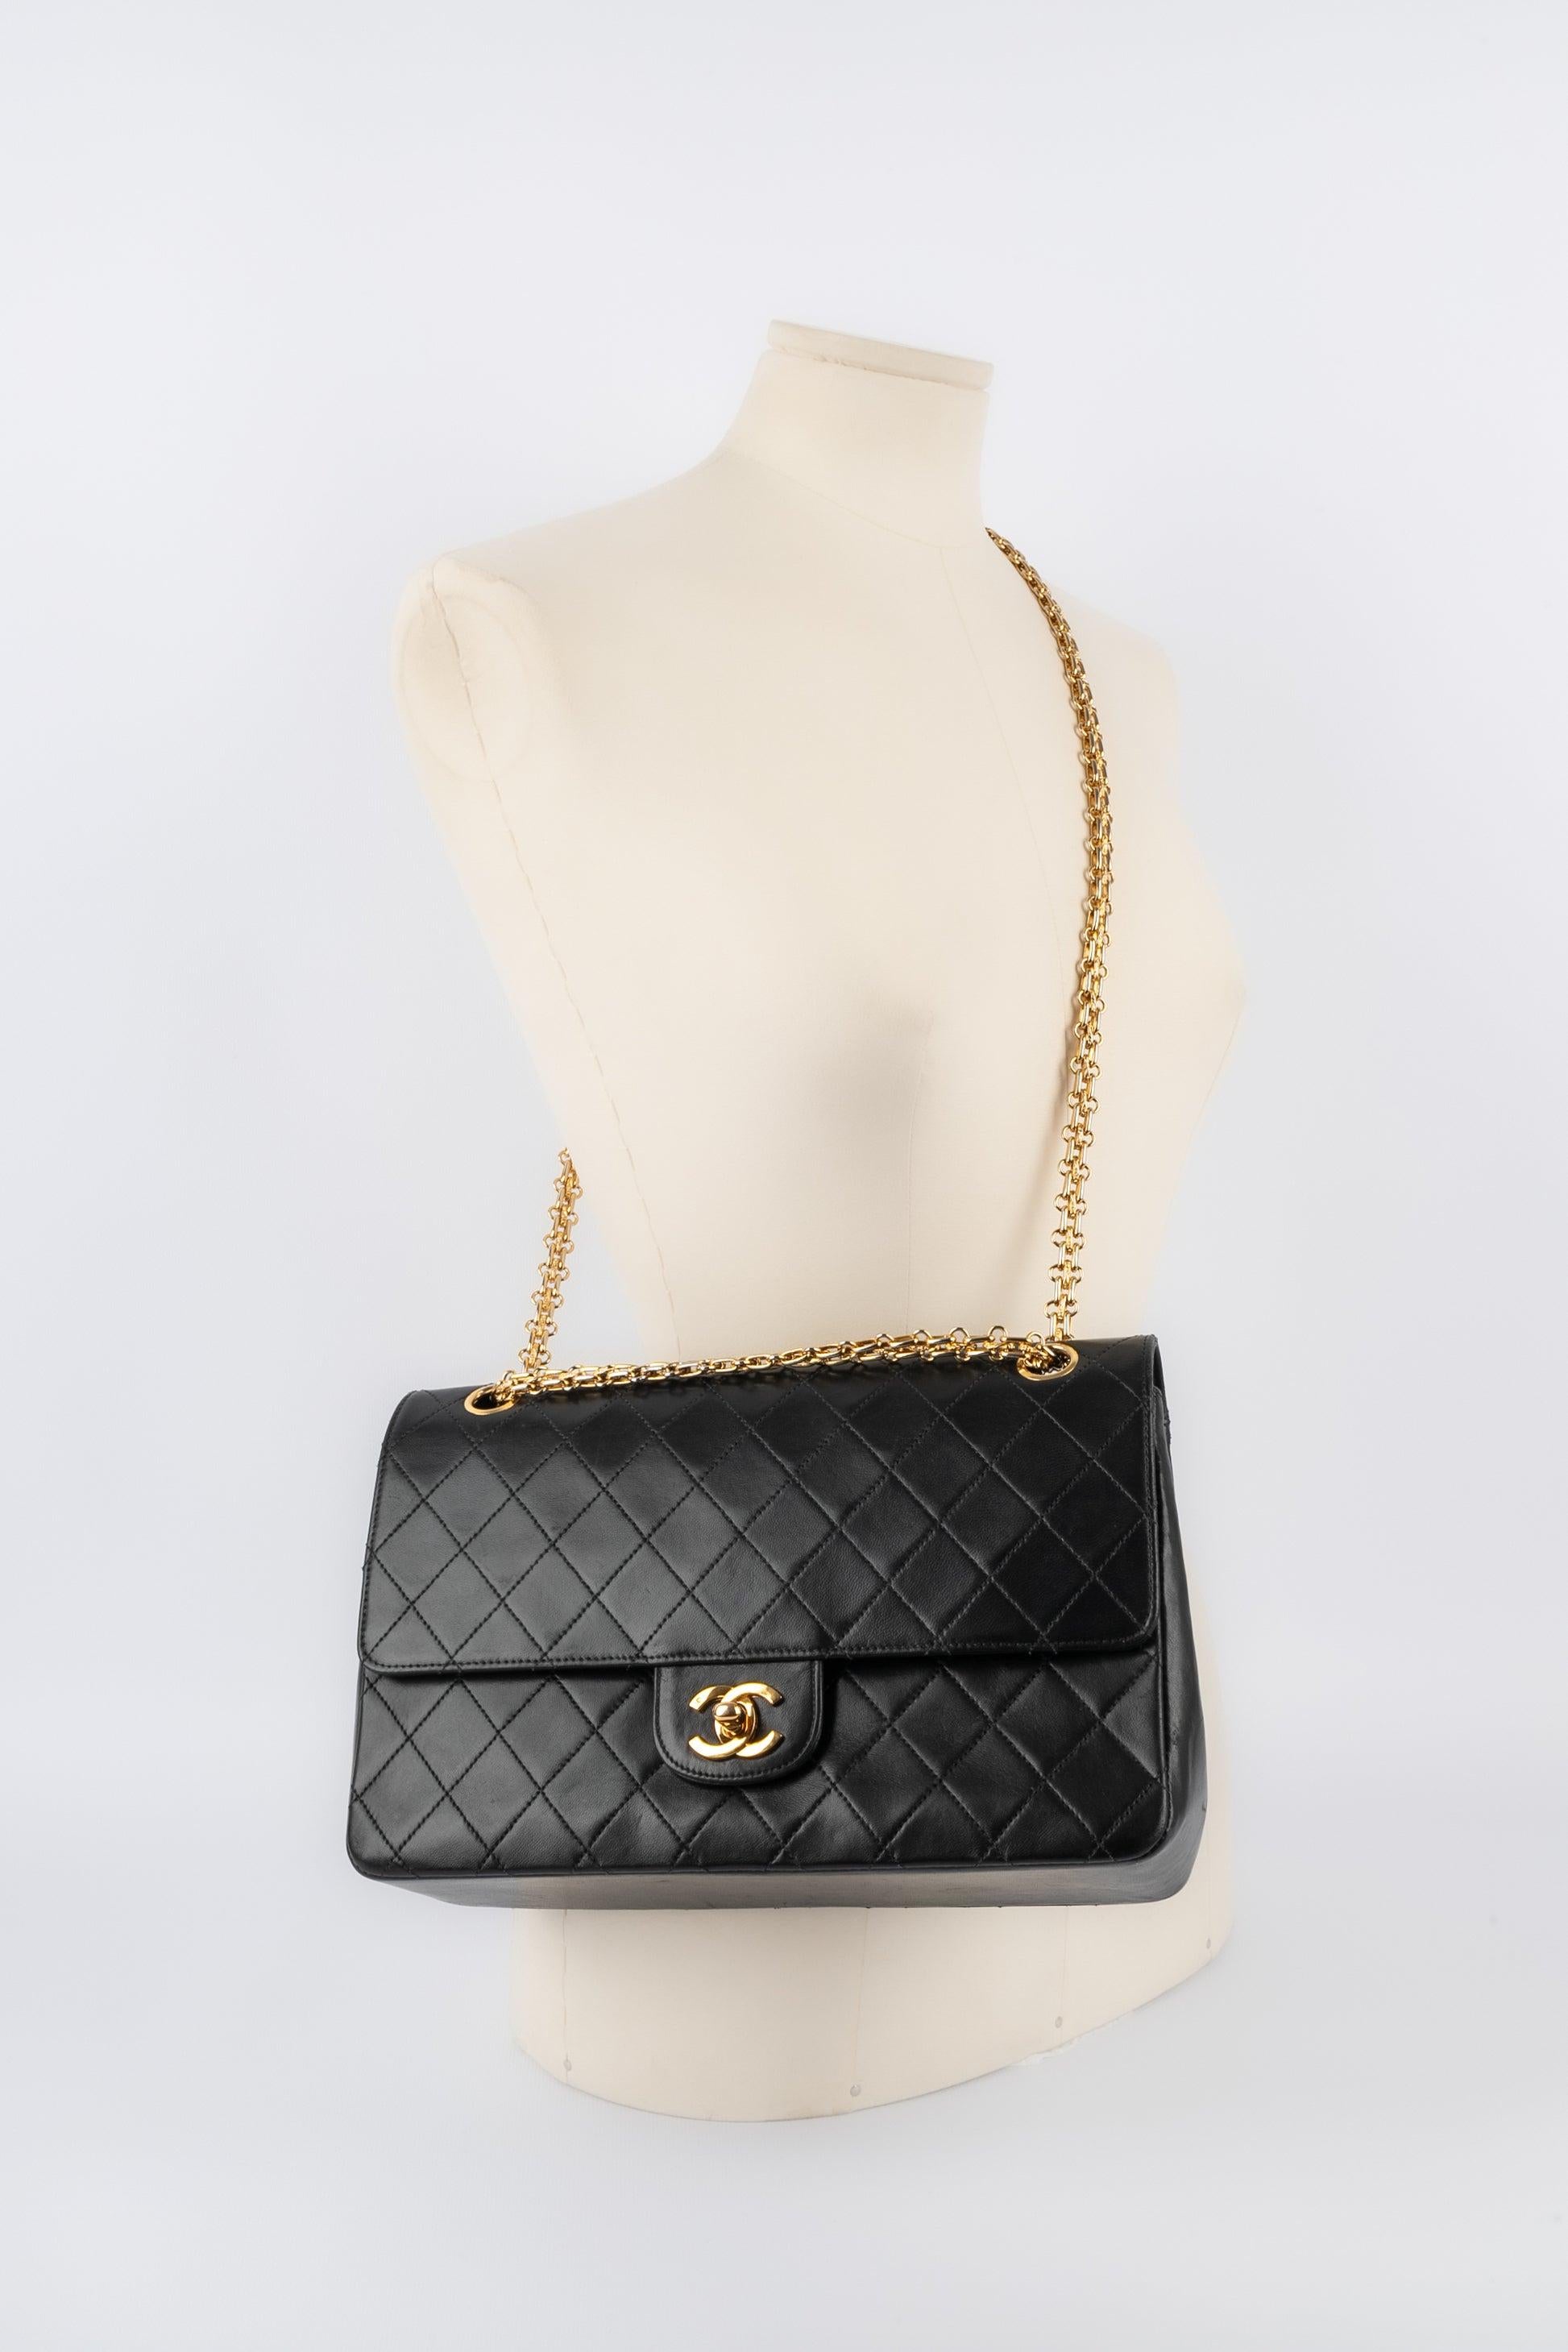 Chanel Quilted Black Lambskin Timeless Bag, 1997/1999 For Sale 5